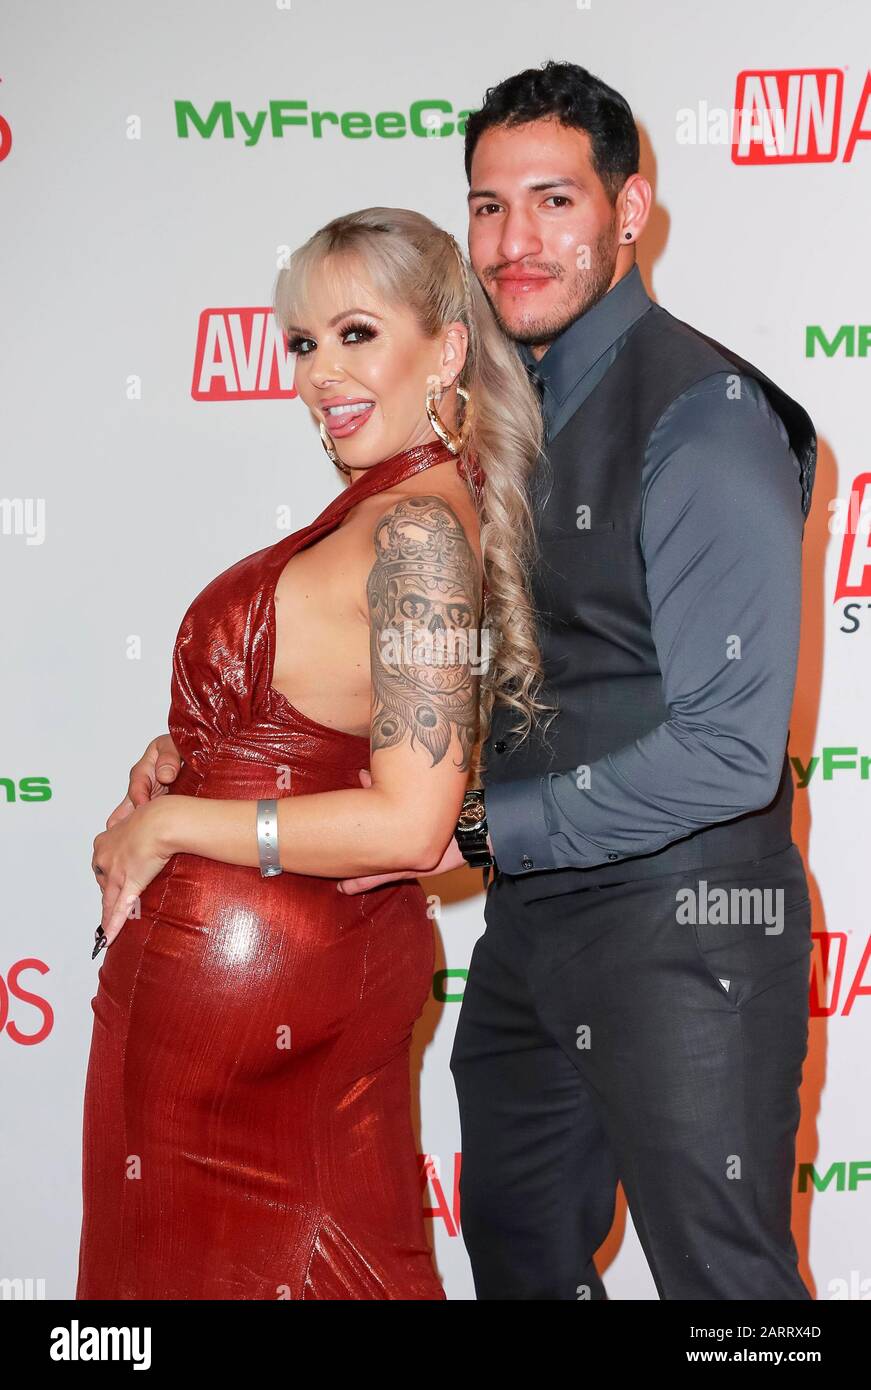 Nina Elle And Guest Attend The 2020 Adult Video News Avn Awards At The Joint Inside Hotel Hard